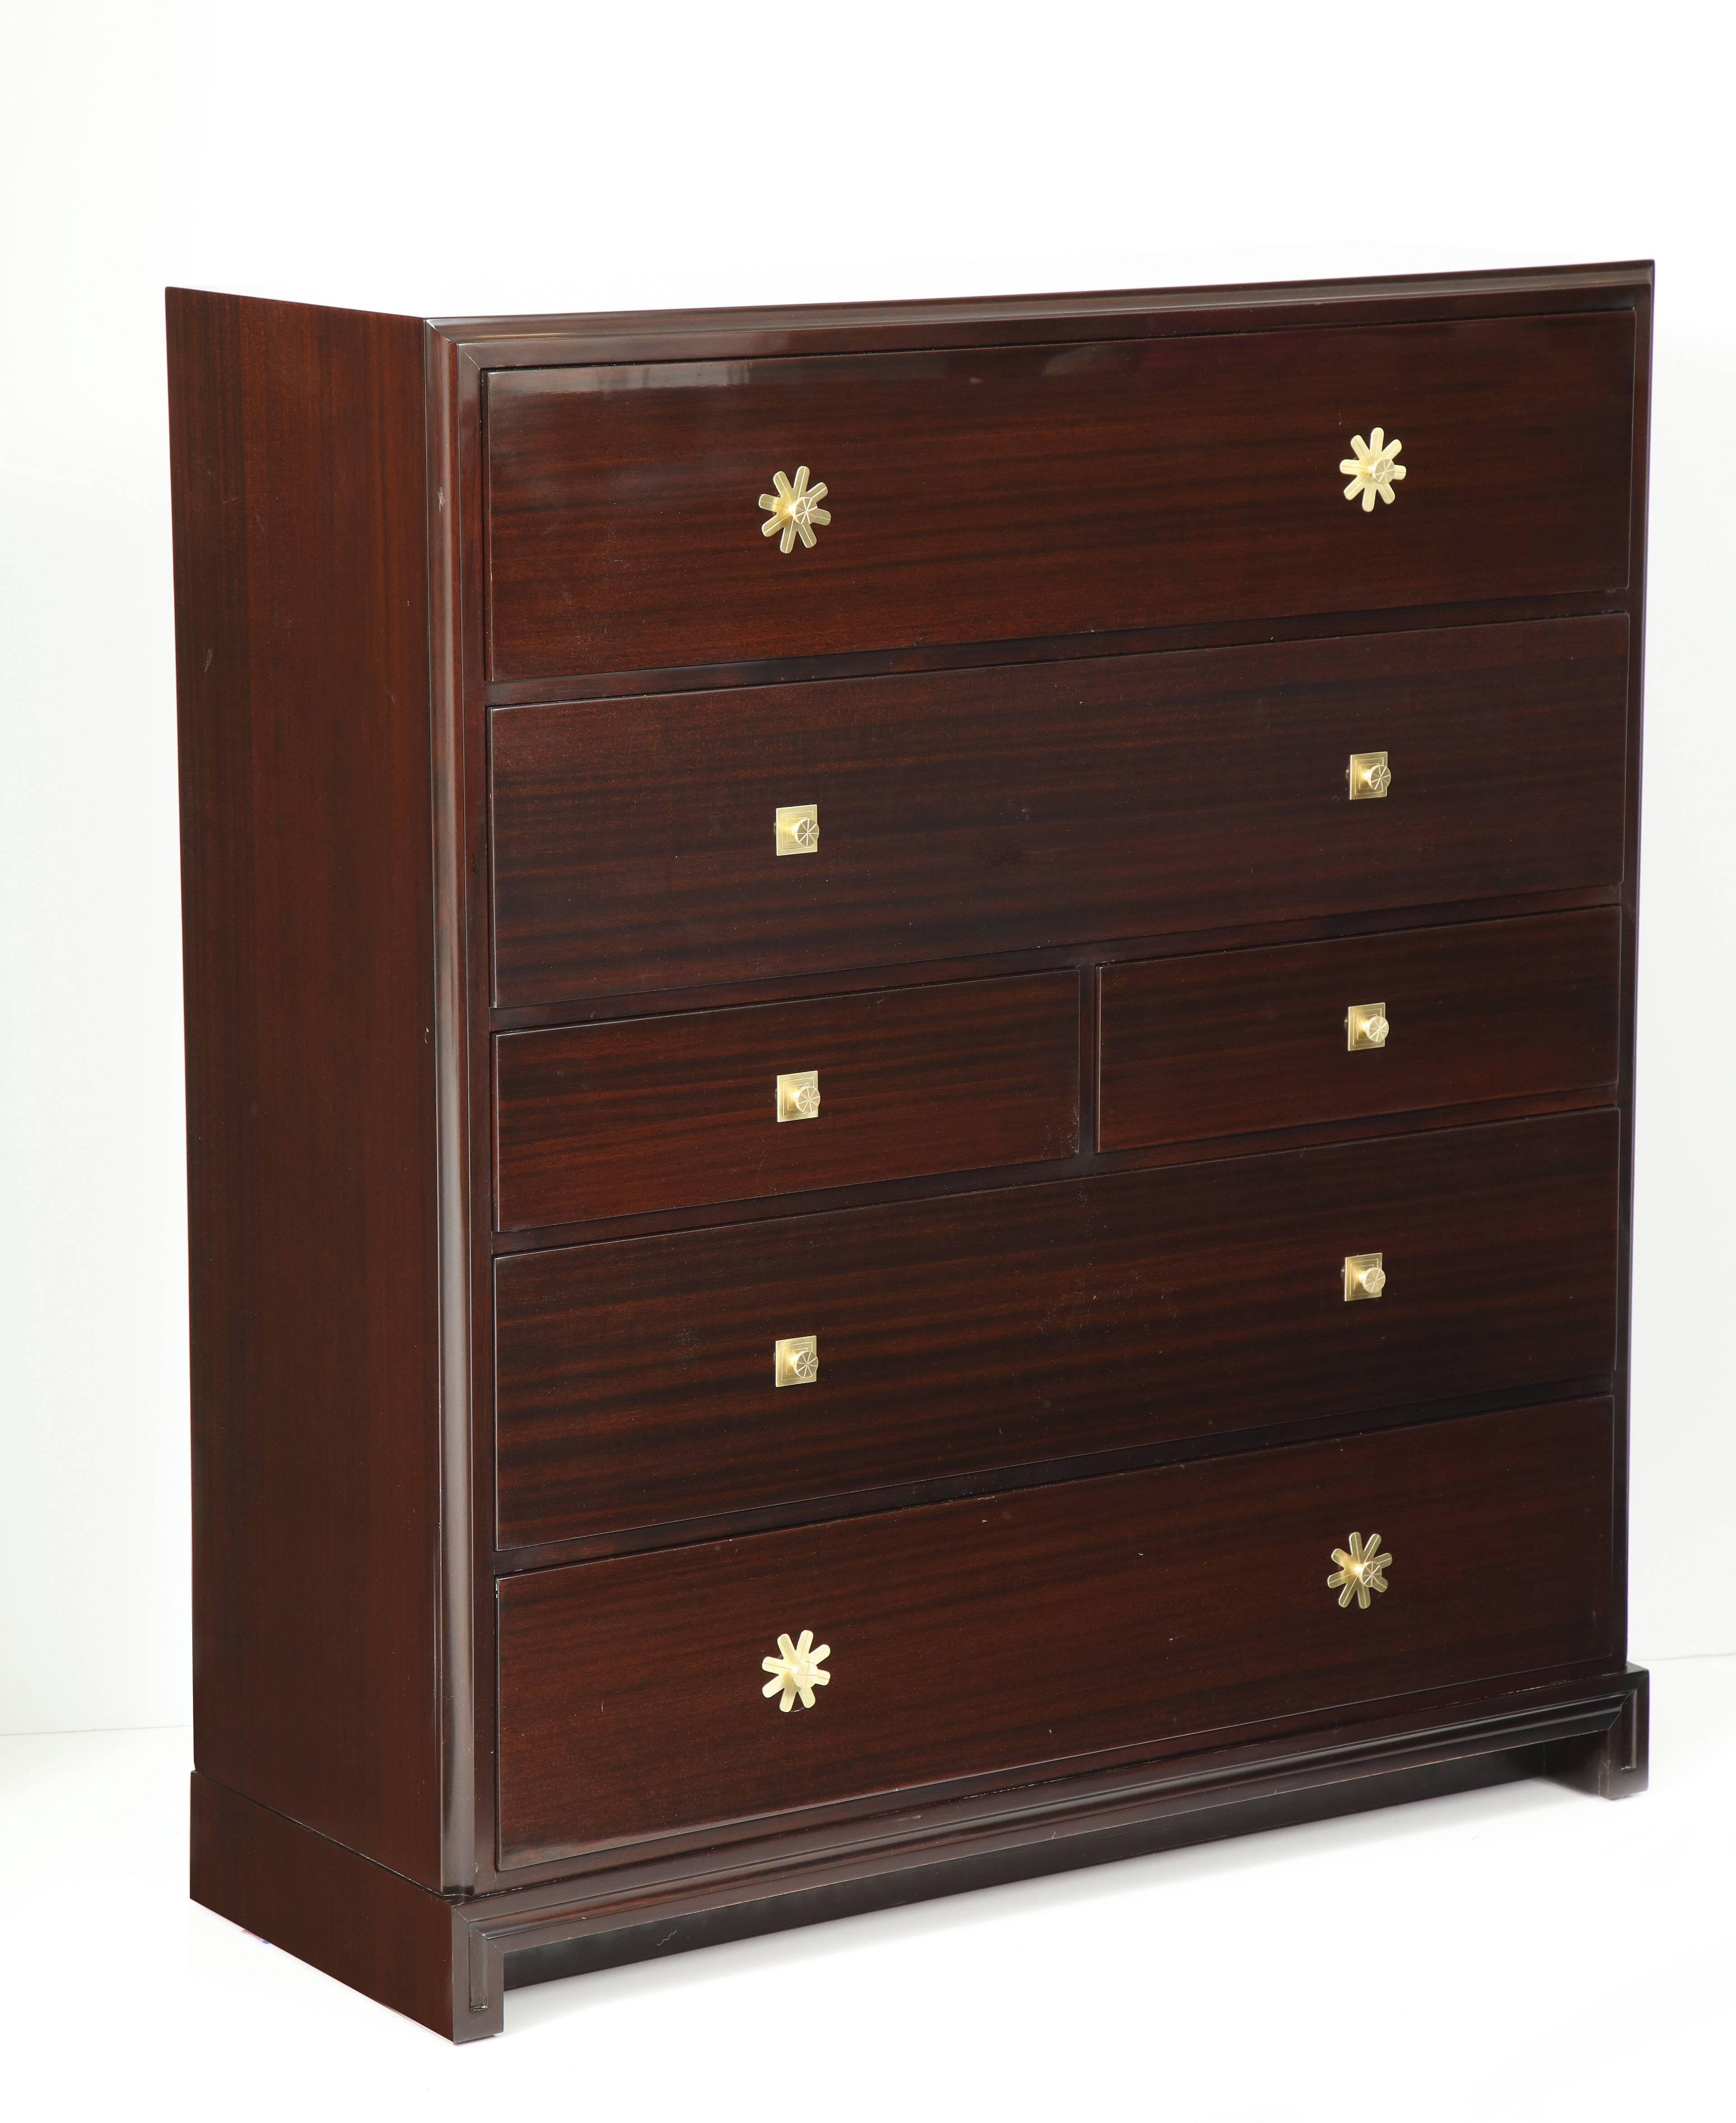 Custom ordered pair chest of drawers in solid mahogany with iconic brass pulls all designed by Tommi Parzinger/Parzinger originals. Each chest has four ample drawers and two half drawers. Each chest stands at an impressive 54 inches tall. Restored